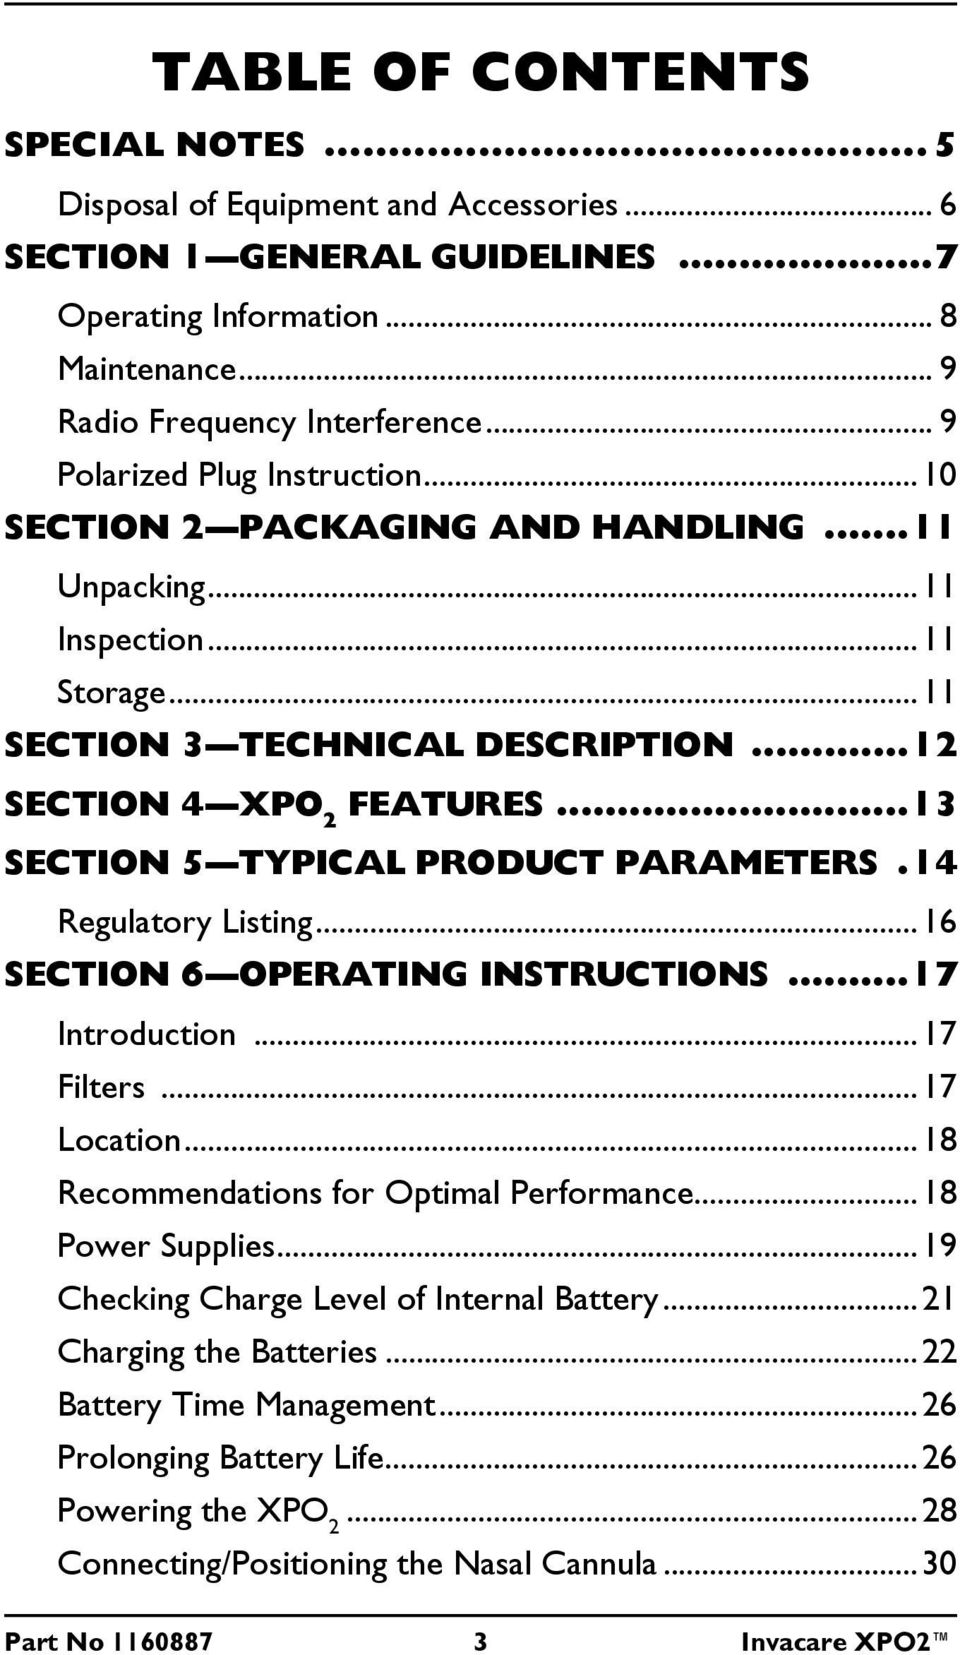 ..13 SECTION 5 TYPICAL PRODUCT PARAMETERS.14 Regulatory Listing...16 SECTION 6 OPERATING INSTRUCTIONS...17 Introduction...17 Filters...17 Location...18 Recommendations for Optimal Performance.